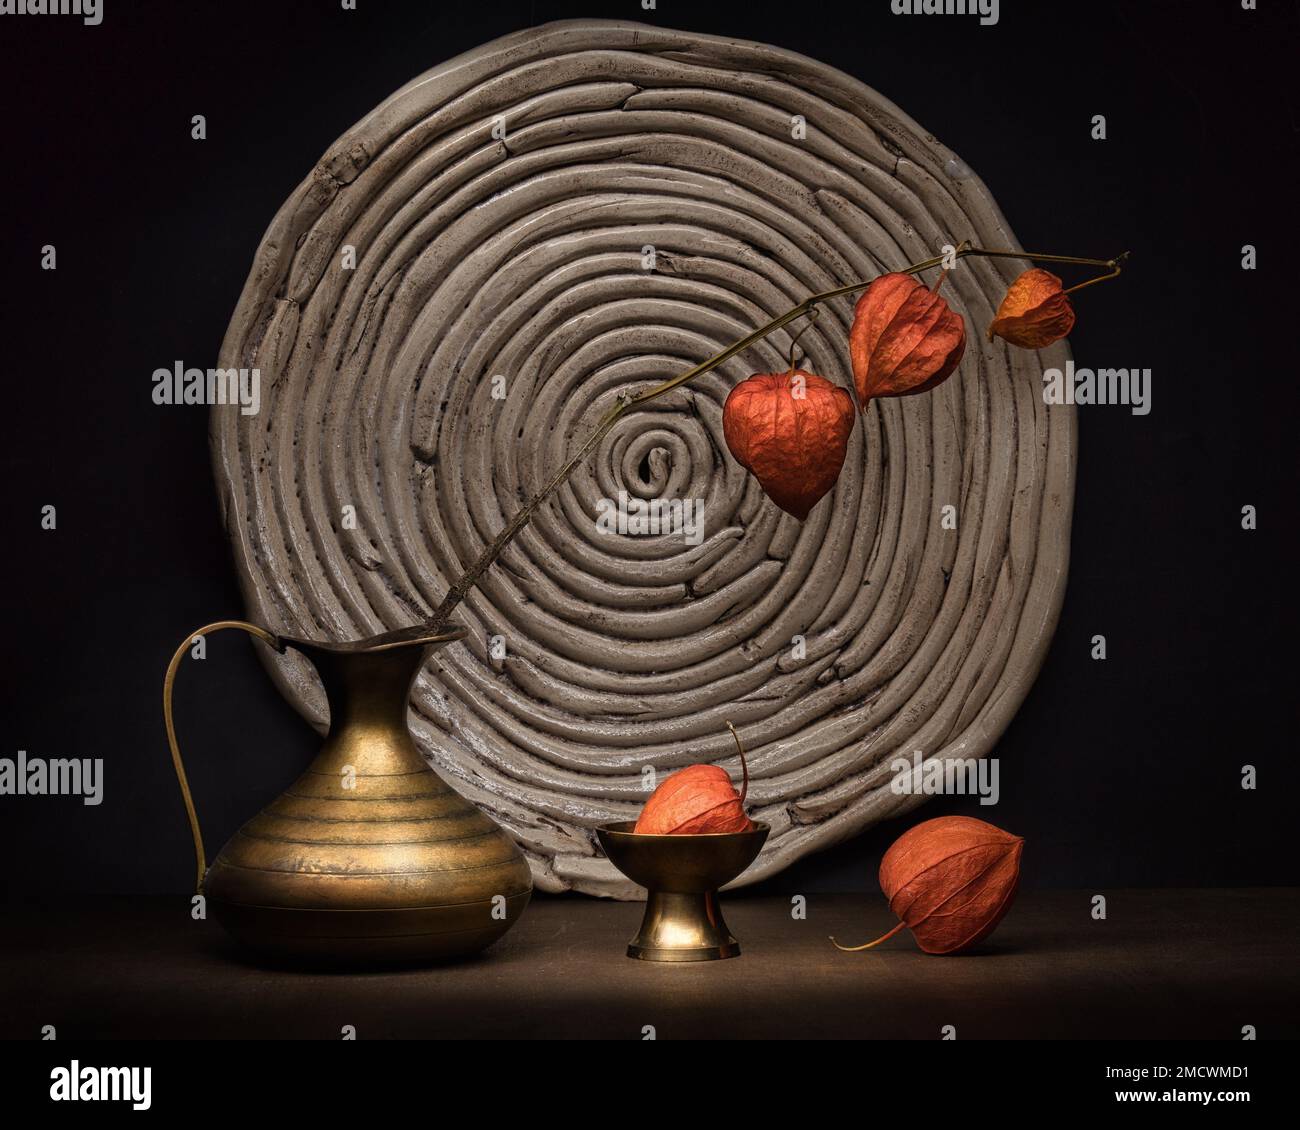 Theme Decoration, Mysticism, Still life with physalis in metal vase in front of round pottery coaster, Studio shot, Symbol photo Stock Photo